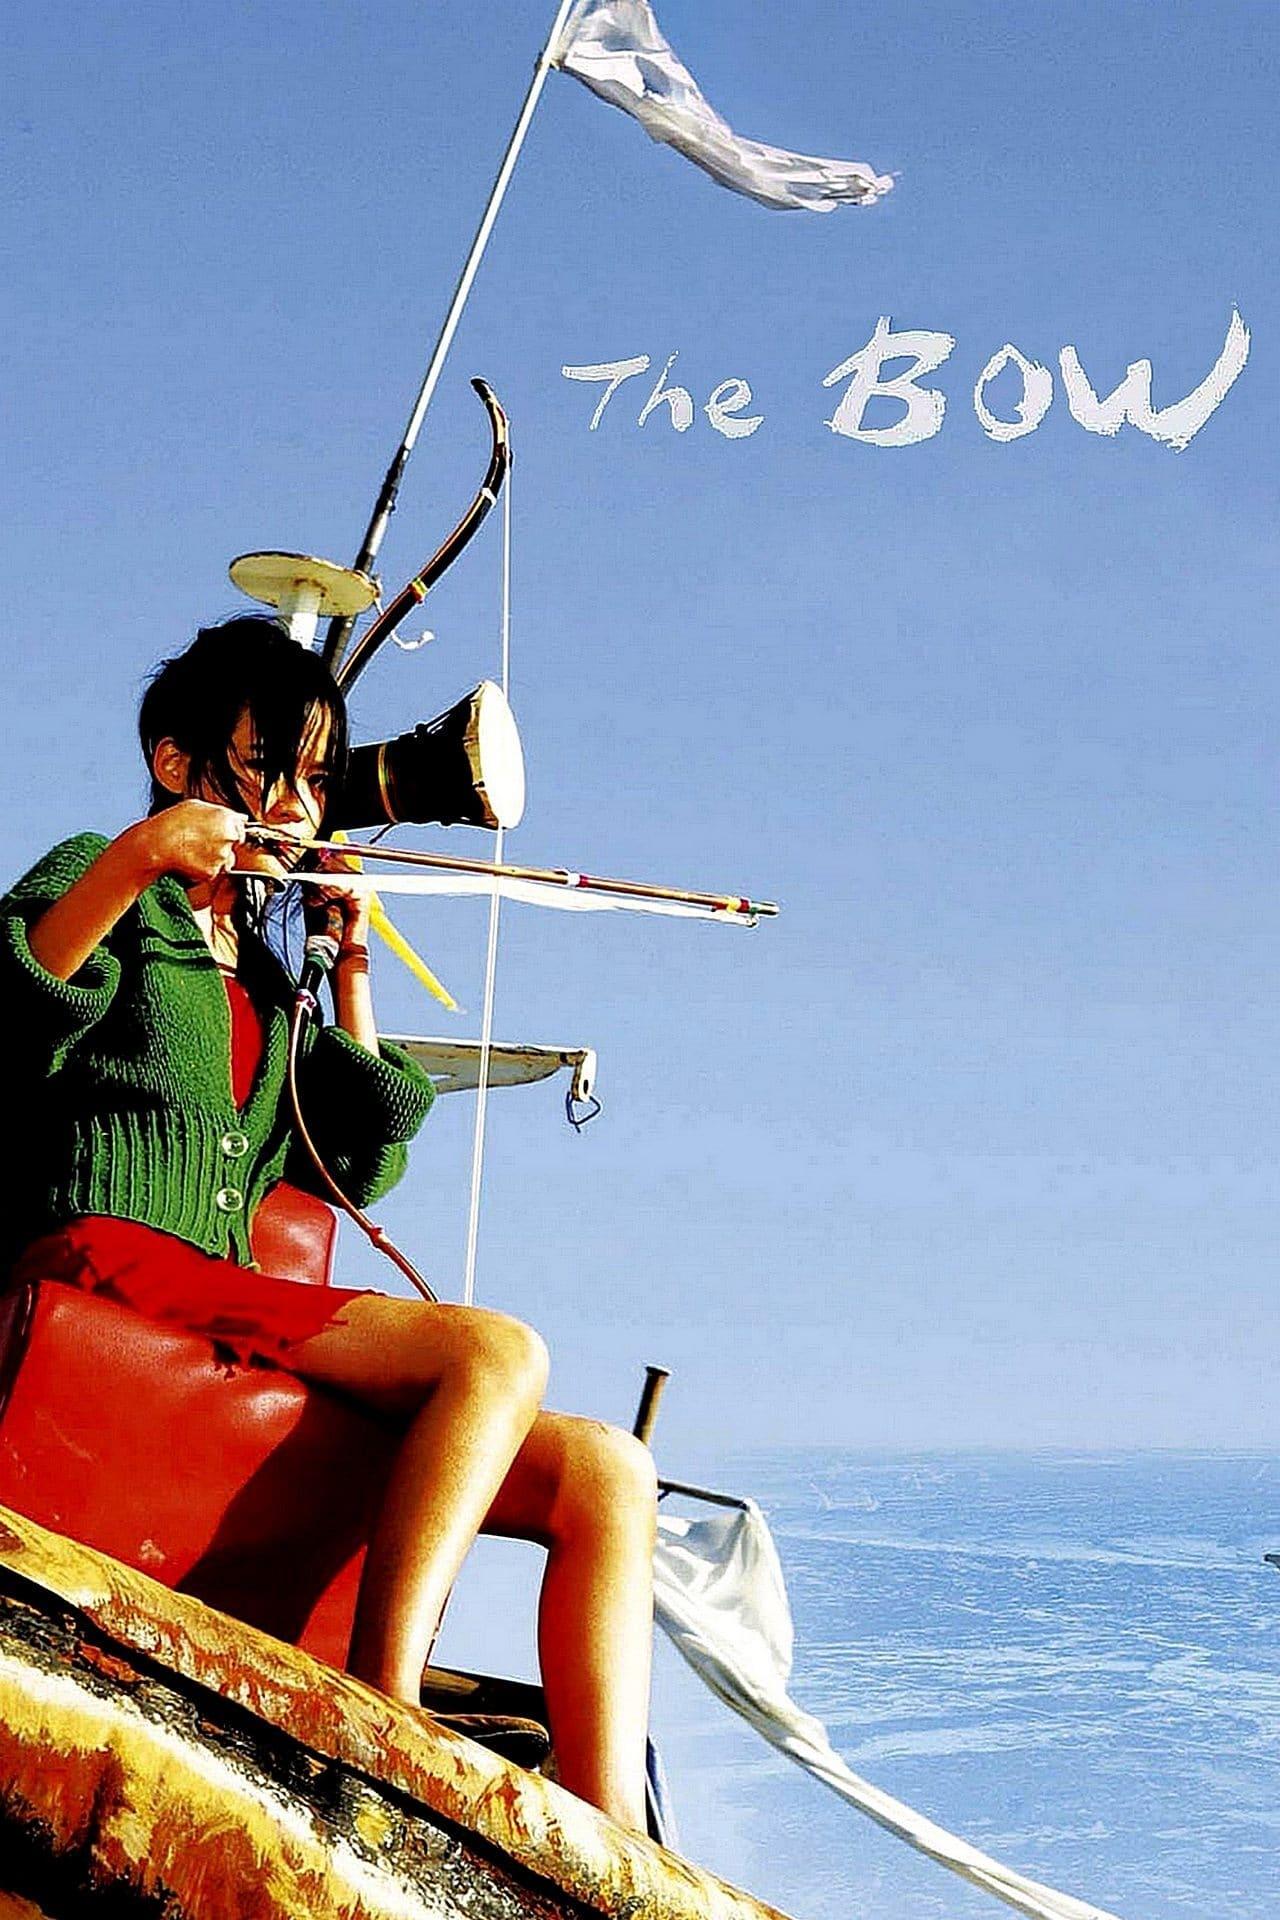 The Bow poster